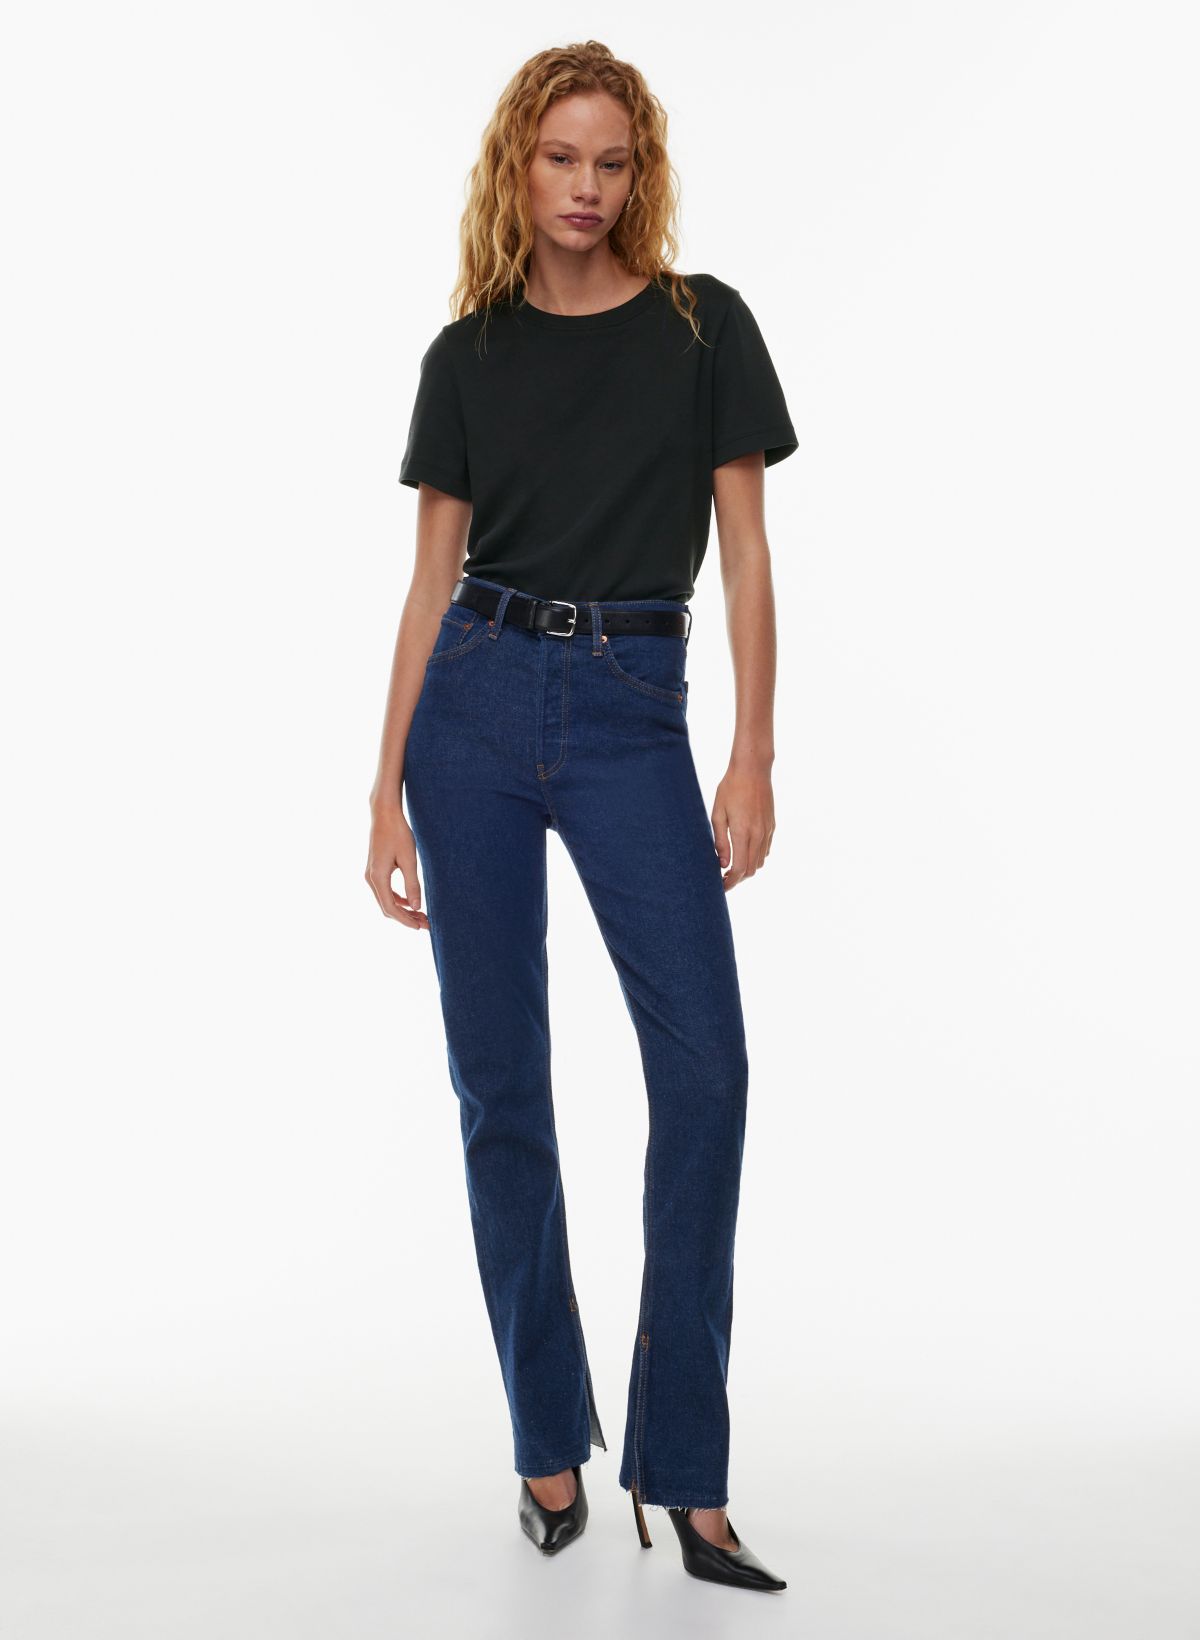 Slim Bootcut Jeans In Plus Size - Blue Moon